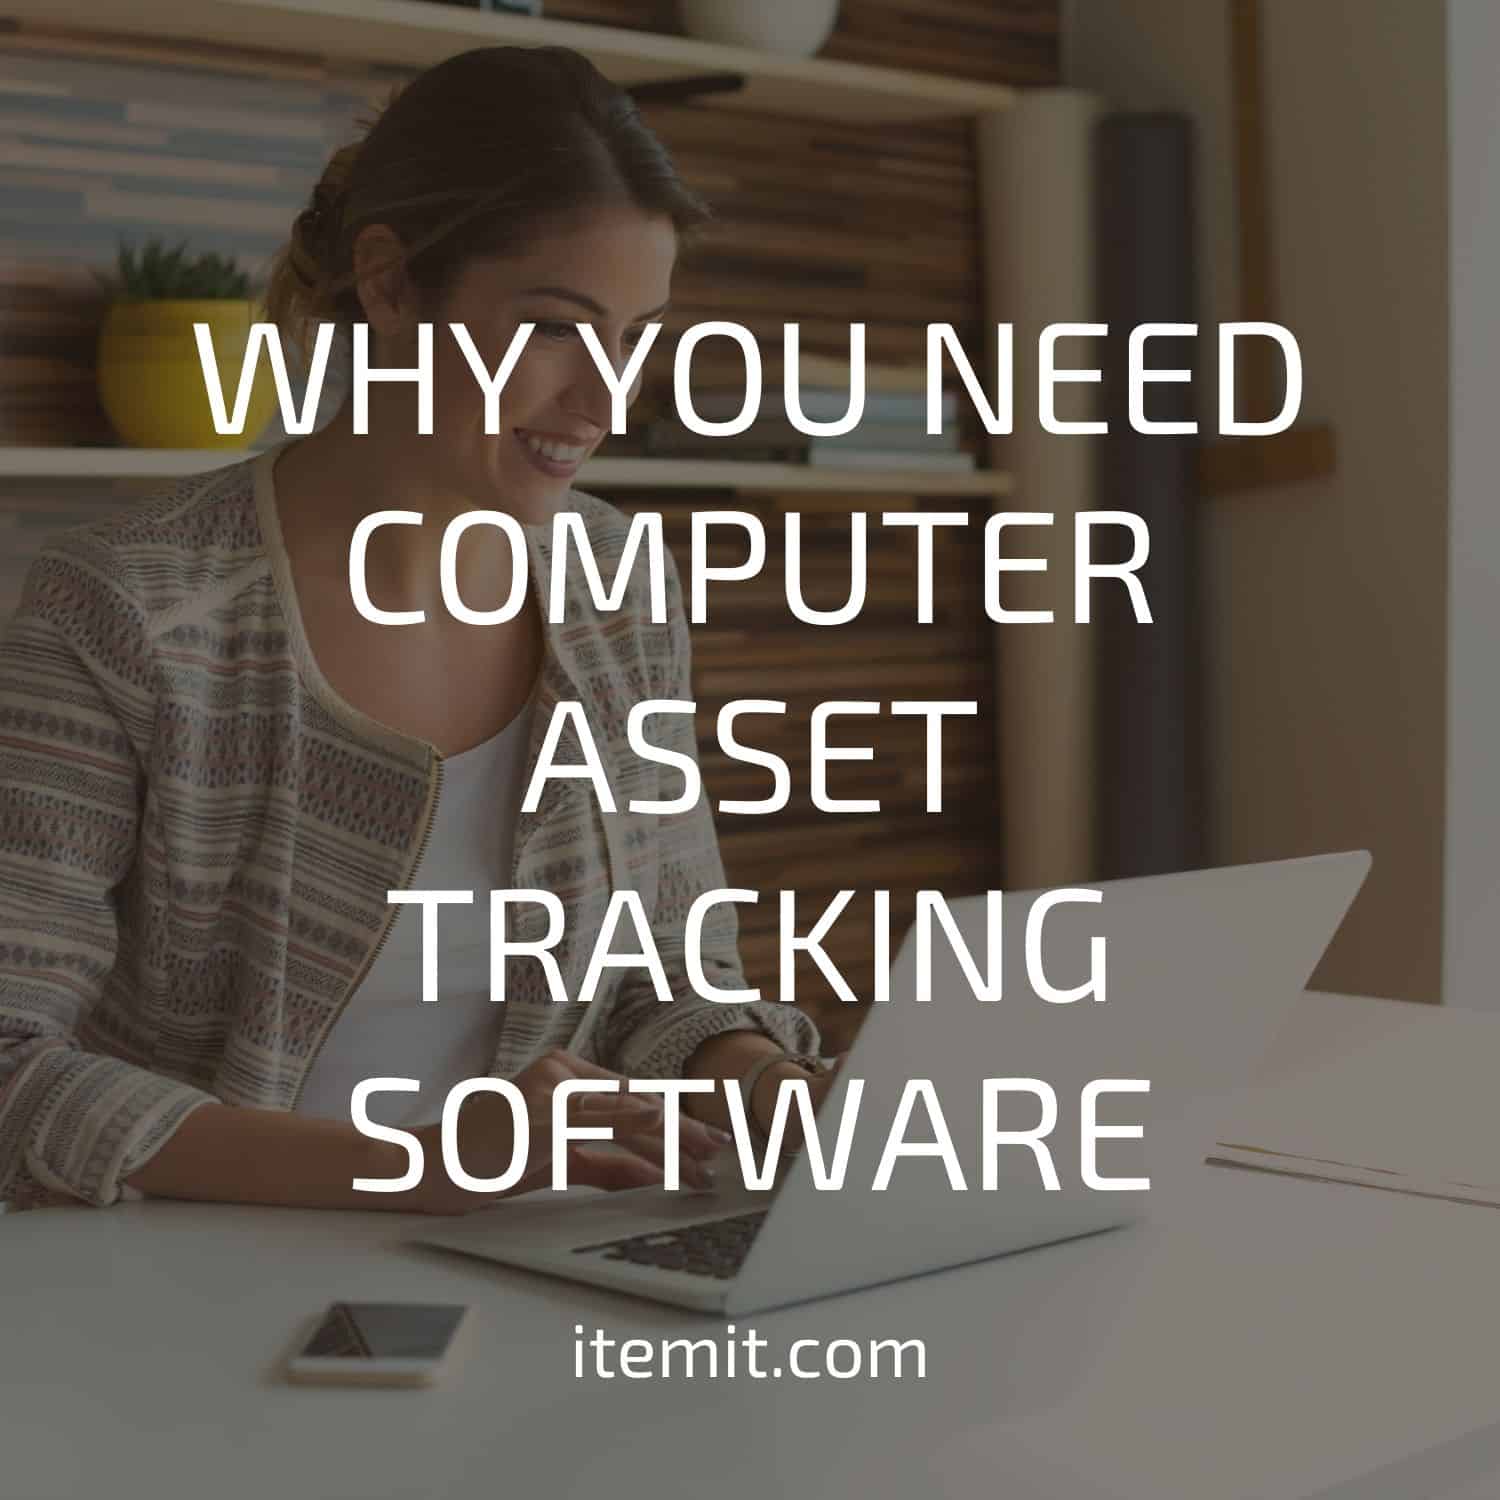 Why you Need Computer Asset Tracking Software